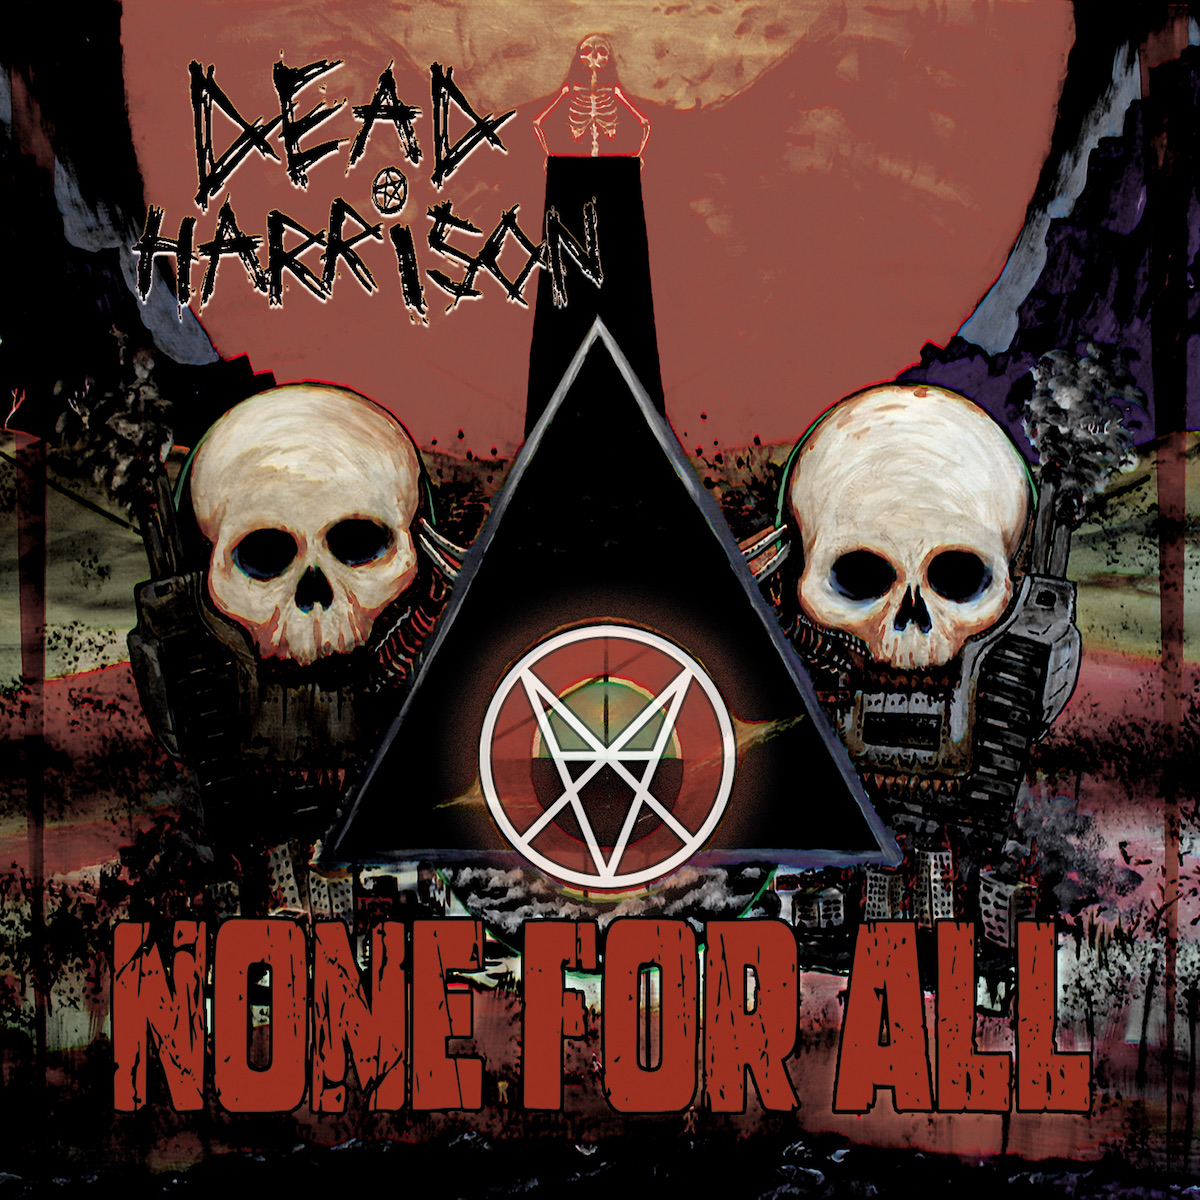 ALBUM REVIEW: None for All by Dead Harrison